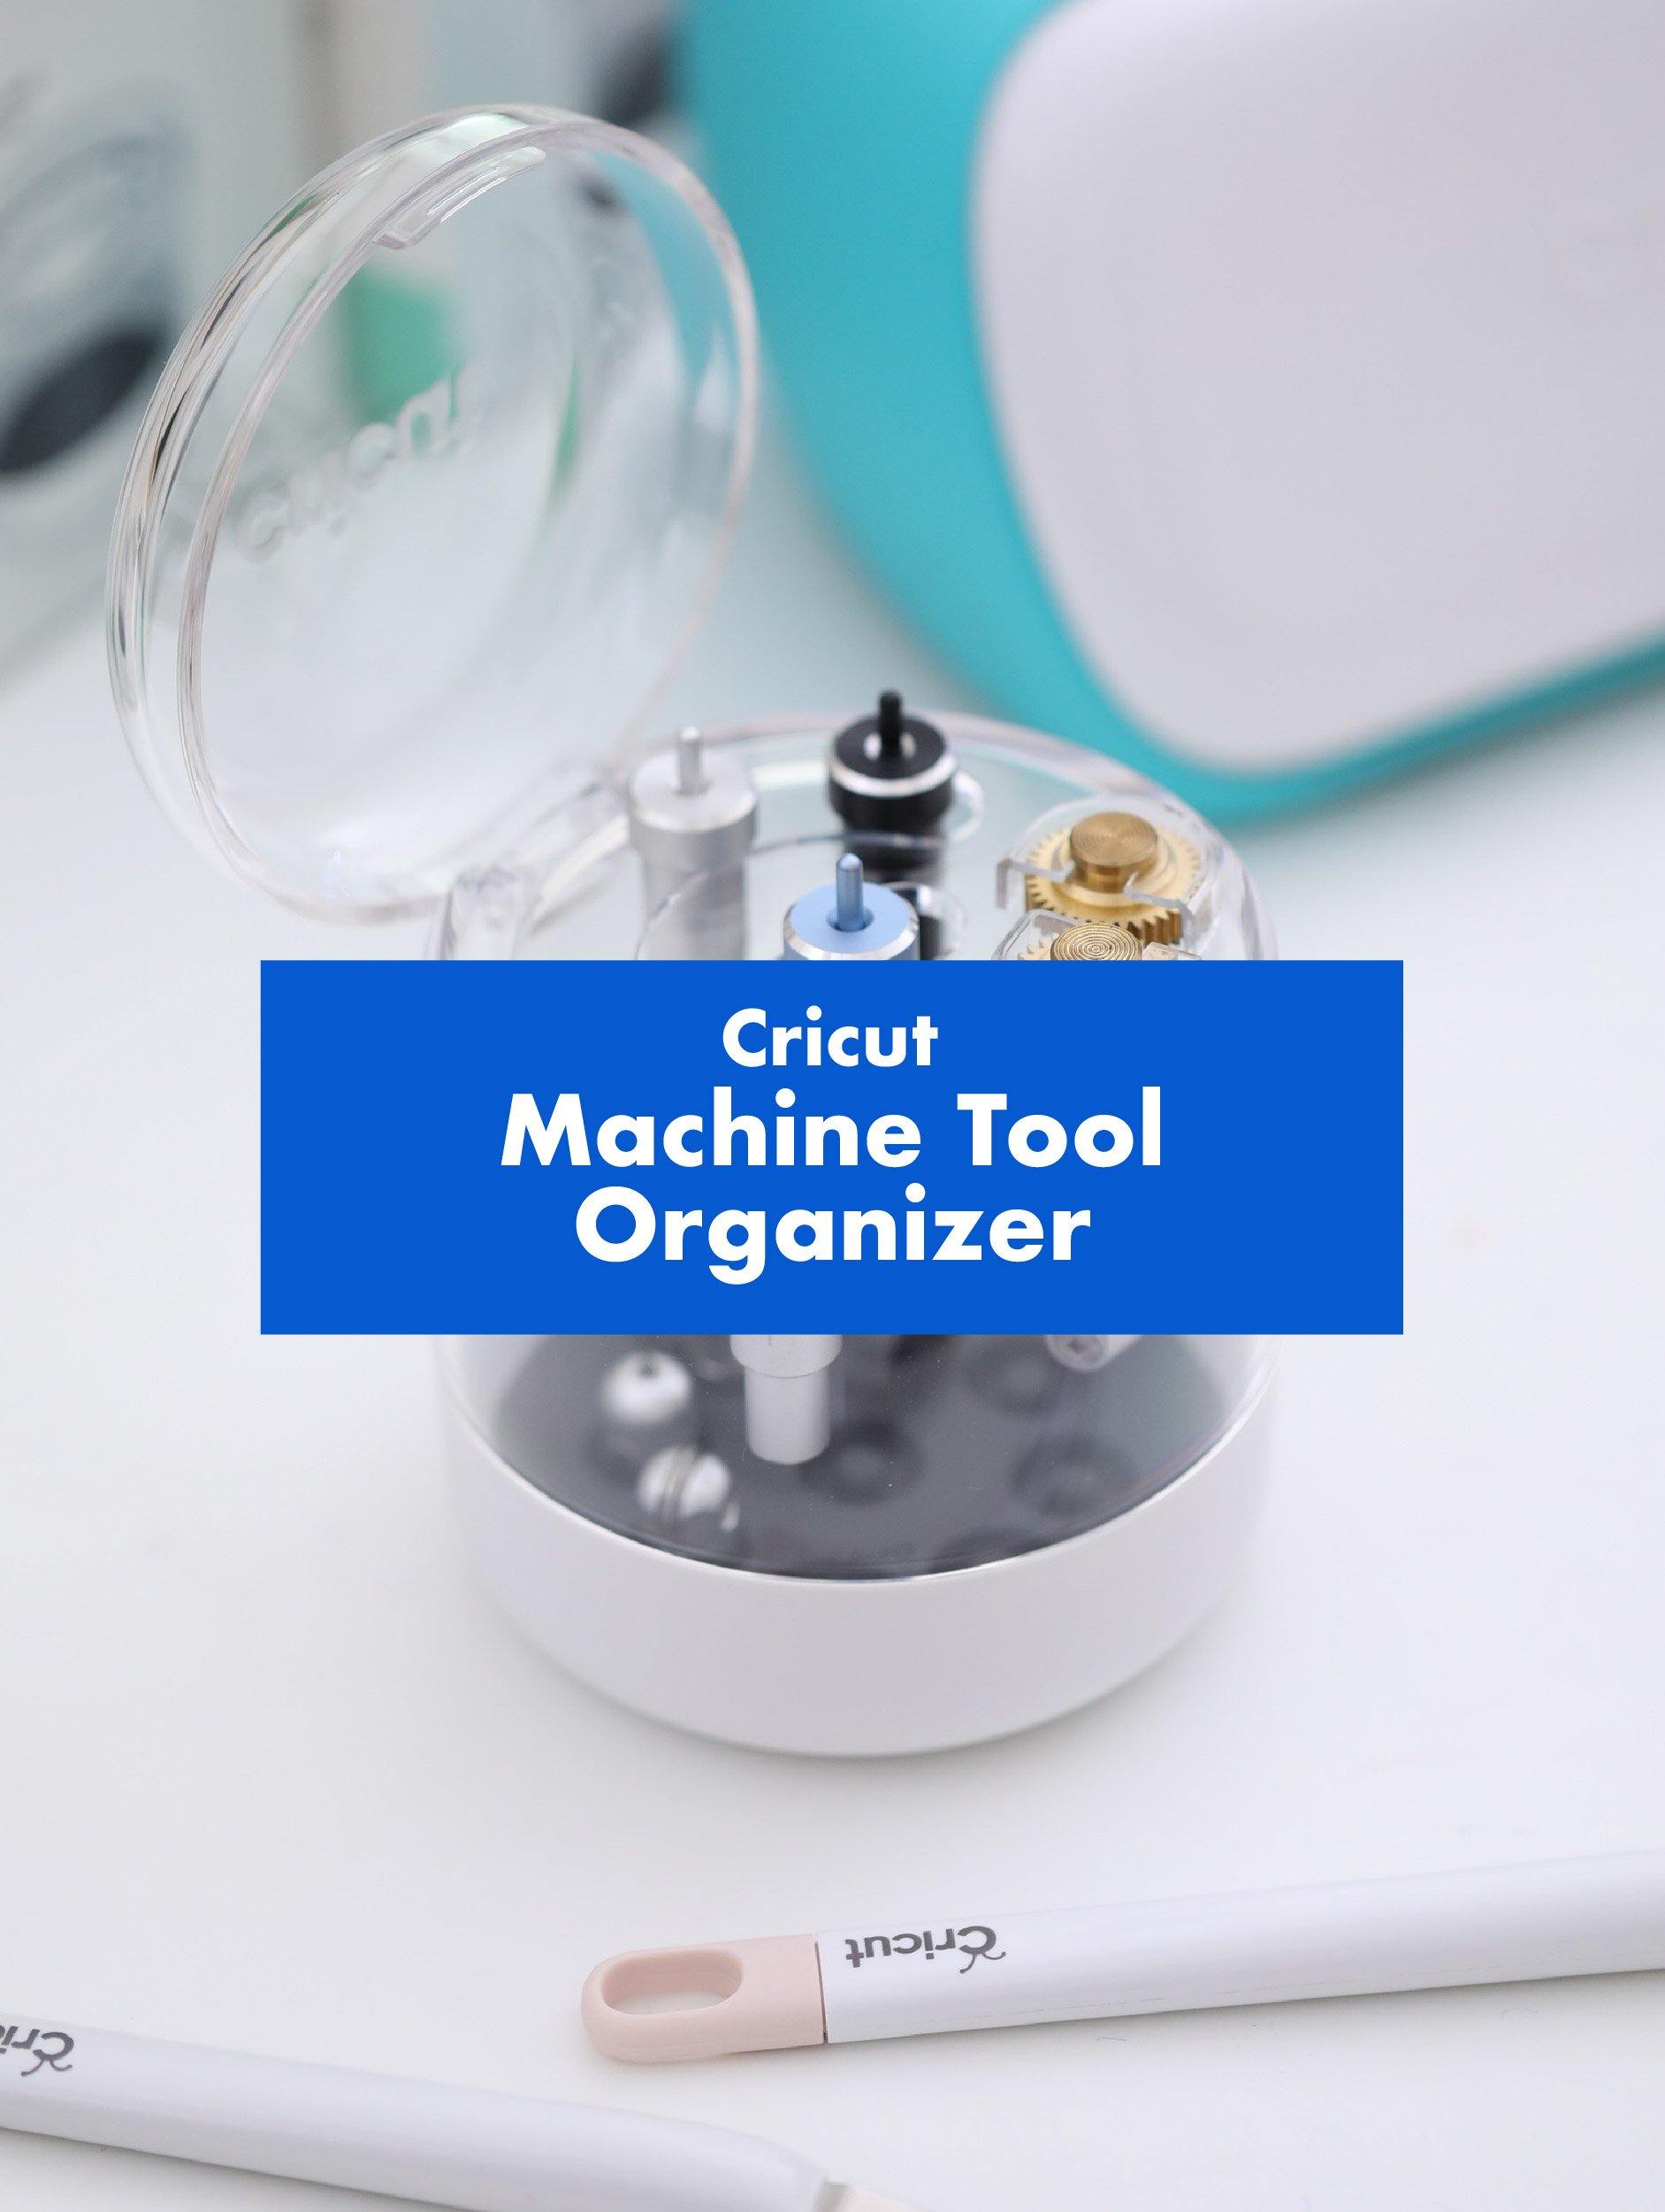 Cricut Machine Tool Organizer for DIY Projects Crafts & Arts-Crafting Tools-GooglyGooeys | Cricut | Arts Craft and DIY Store based in the Philippines